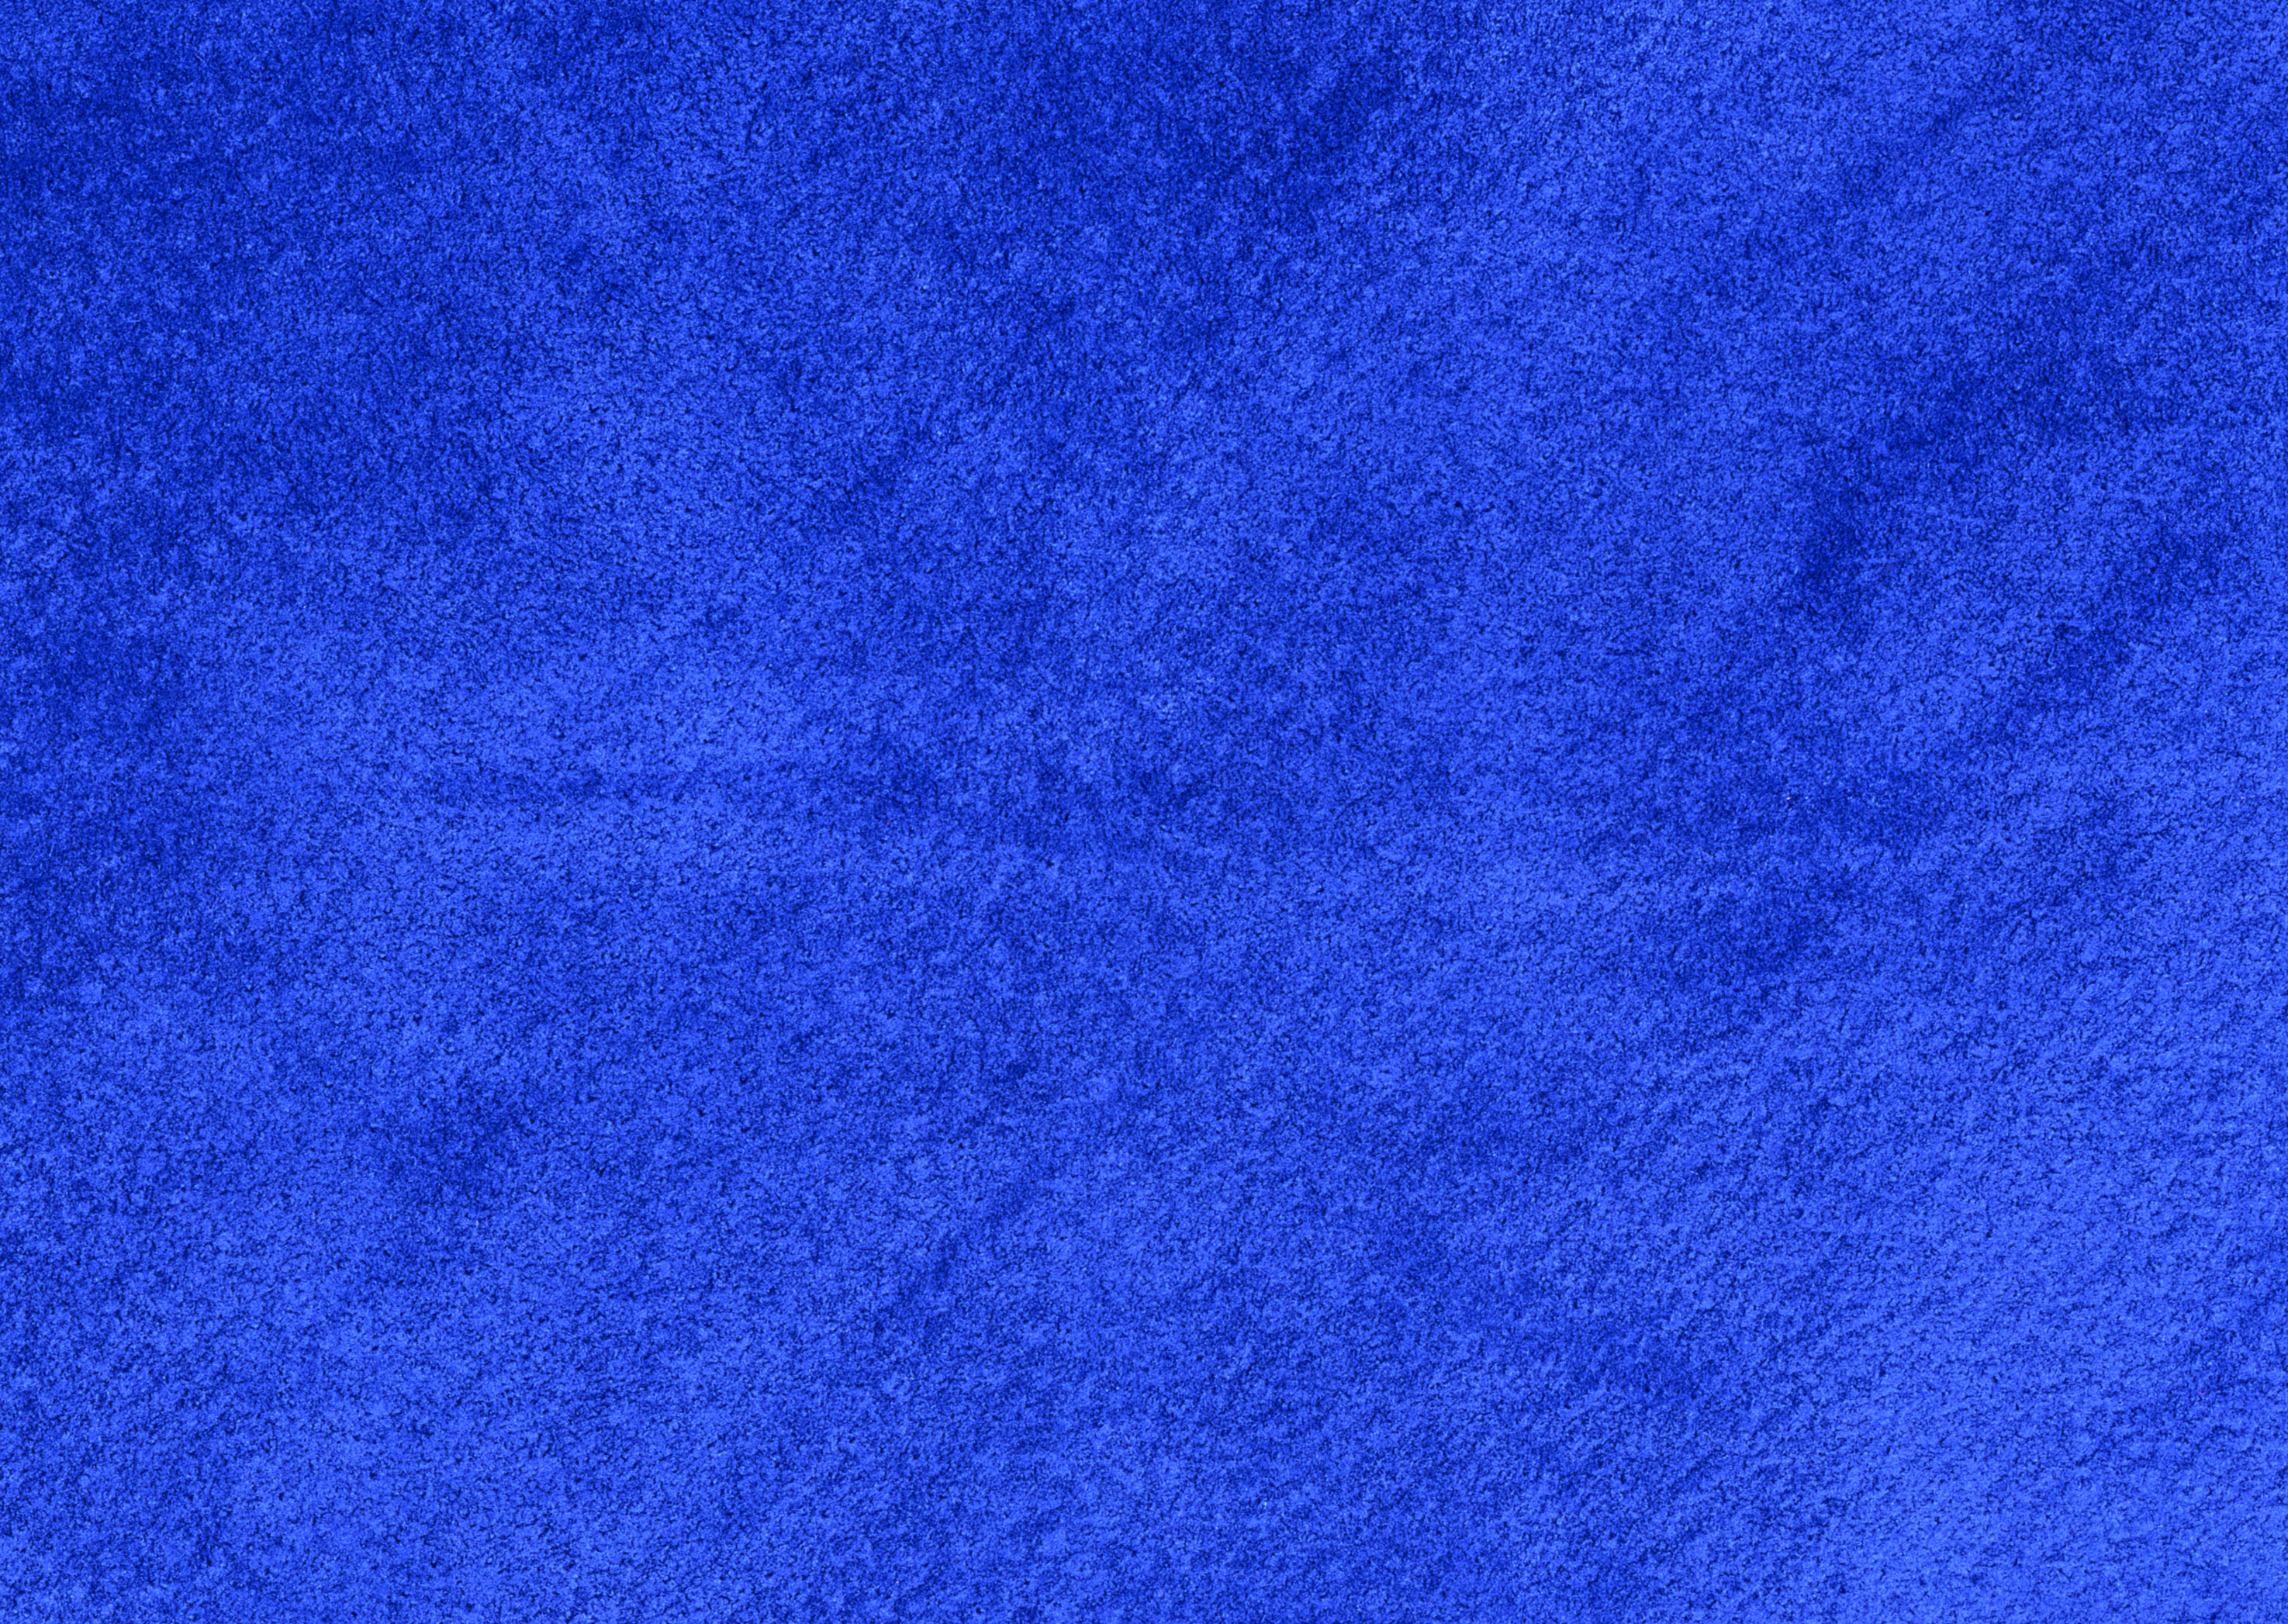 Blue Leather Big Textures Background Image Picture